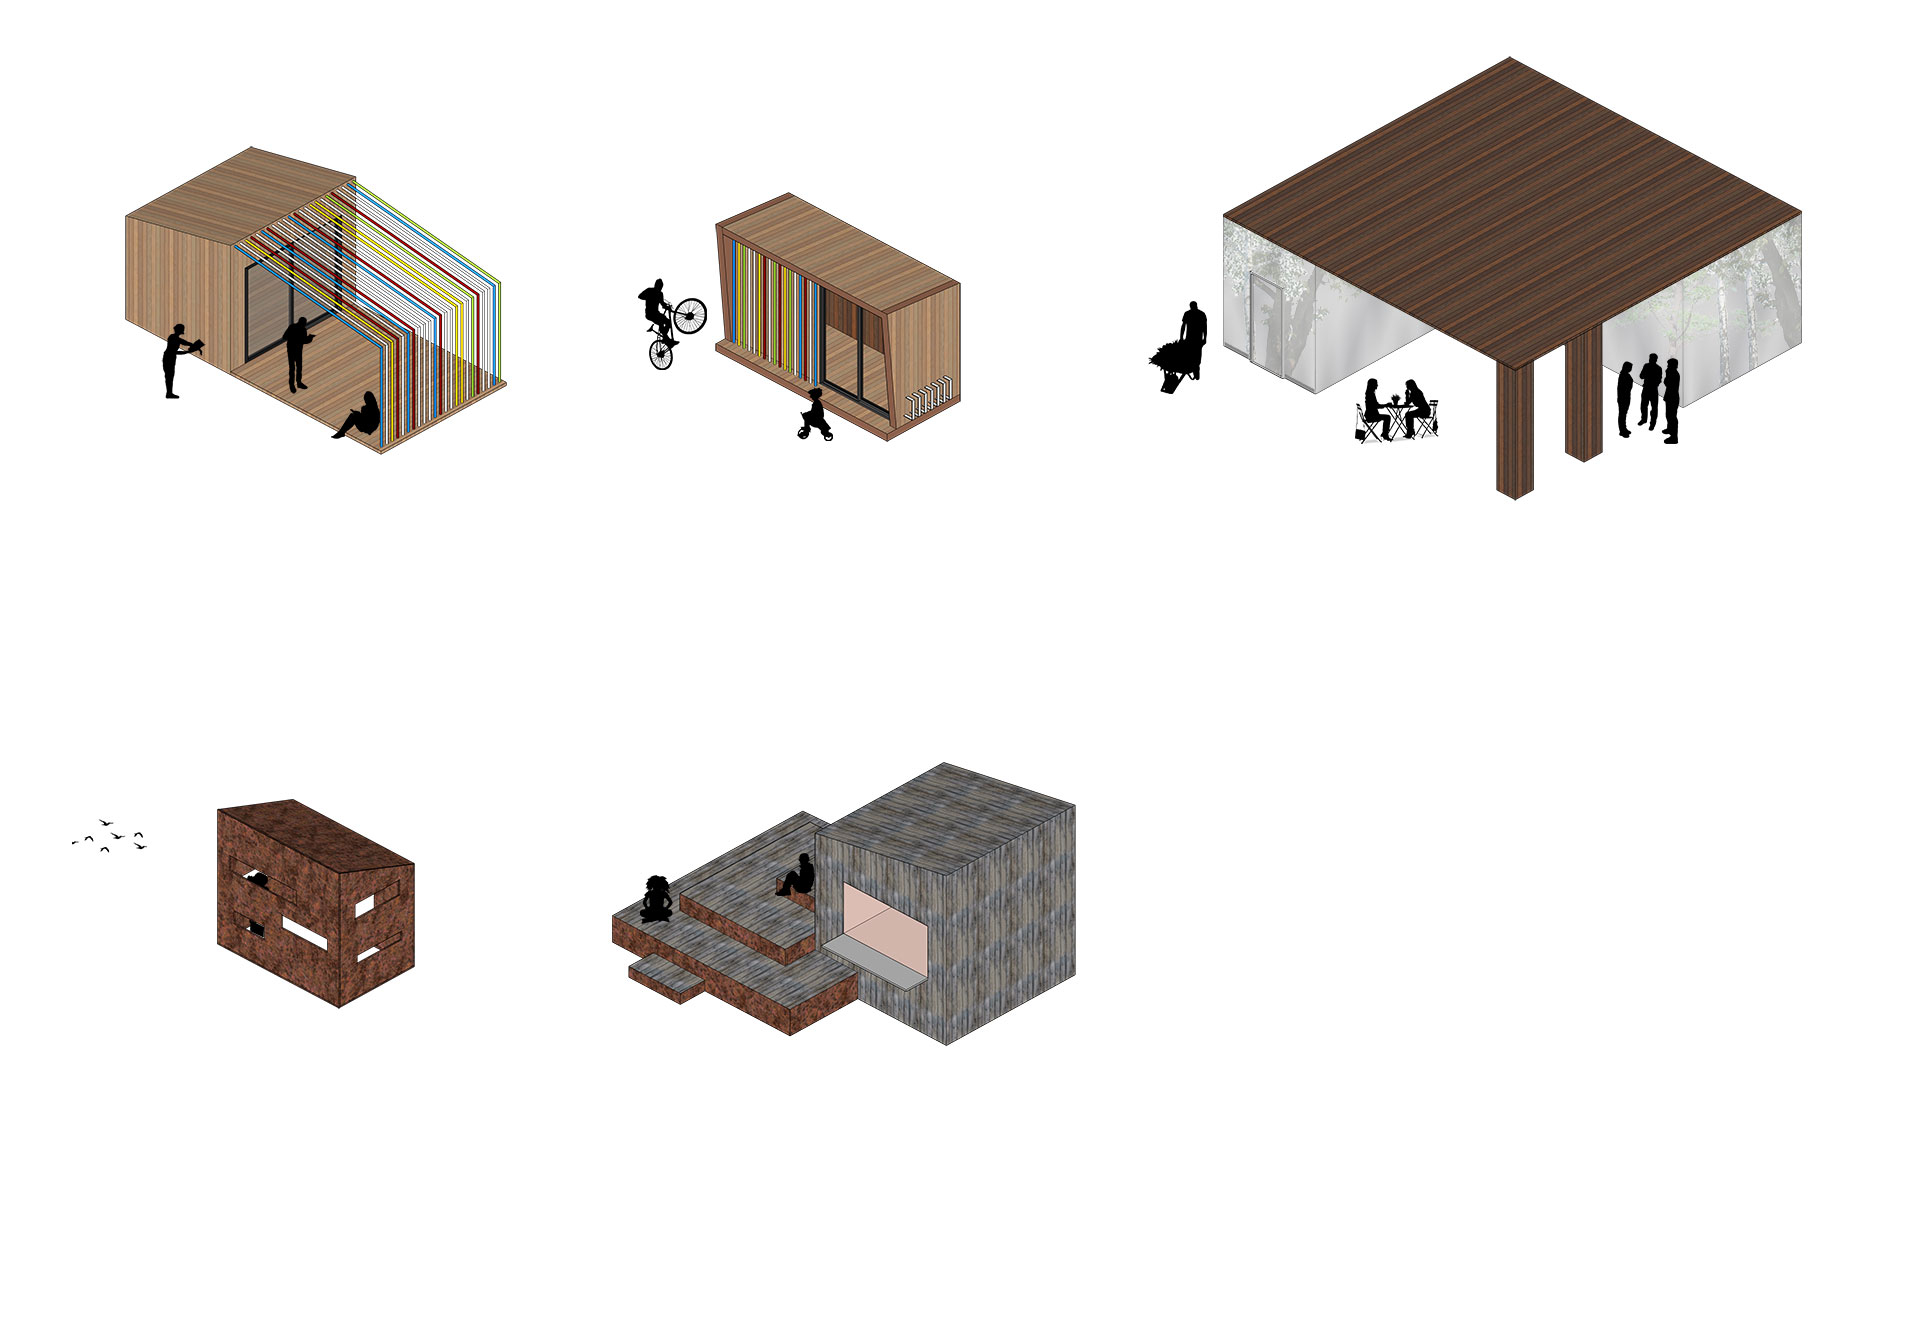 Graphic of a series of use-specific park pavilions